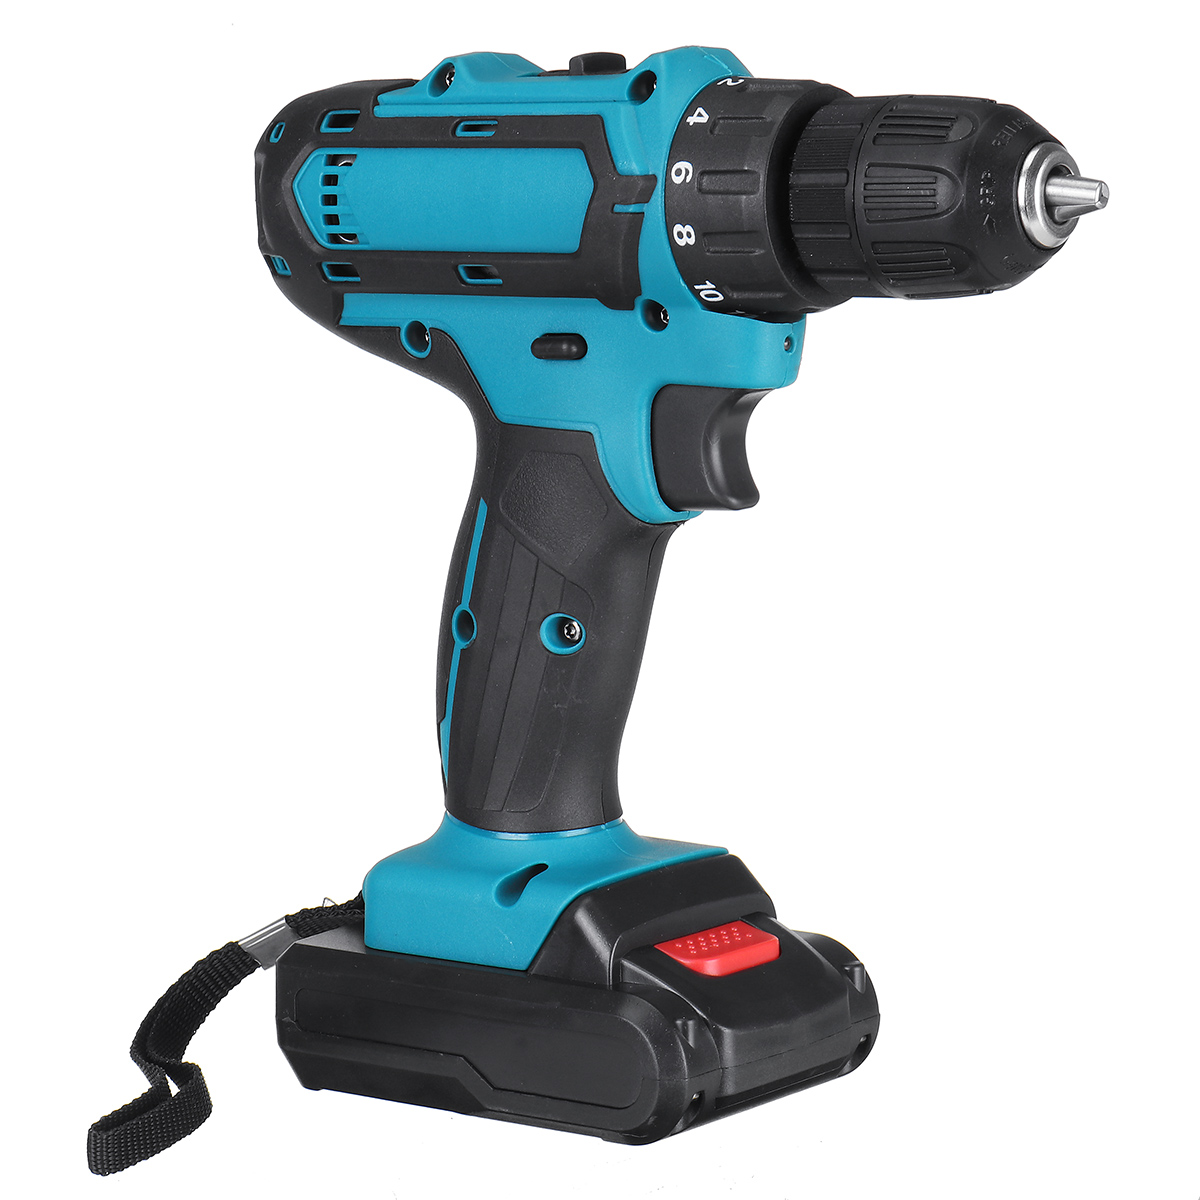 2000rpm-38Nm-21V-Lithium-Electric-Impact-Hammer-Drill-Wood-Drilling-Screwdrivers-with-Battery-1943477-17